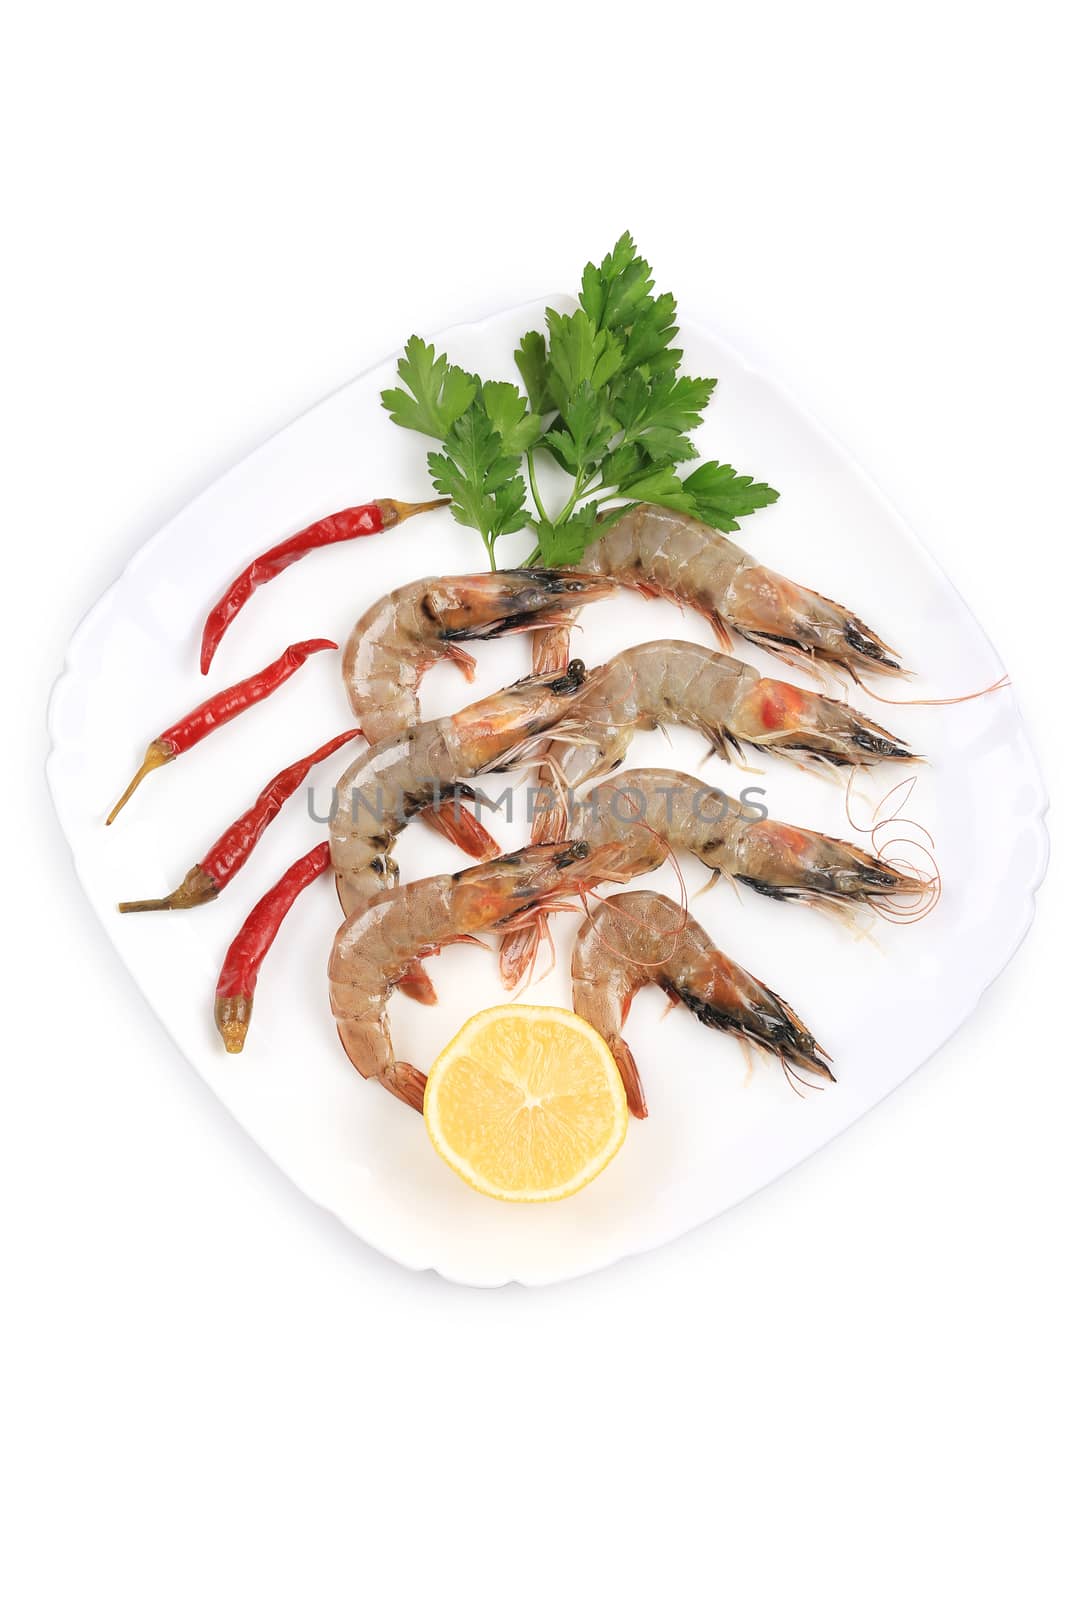 Fresh shrimps on plate with pepper. by indigolotos